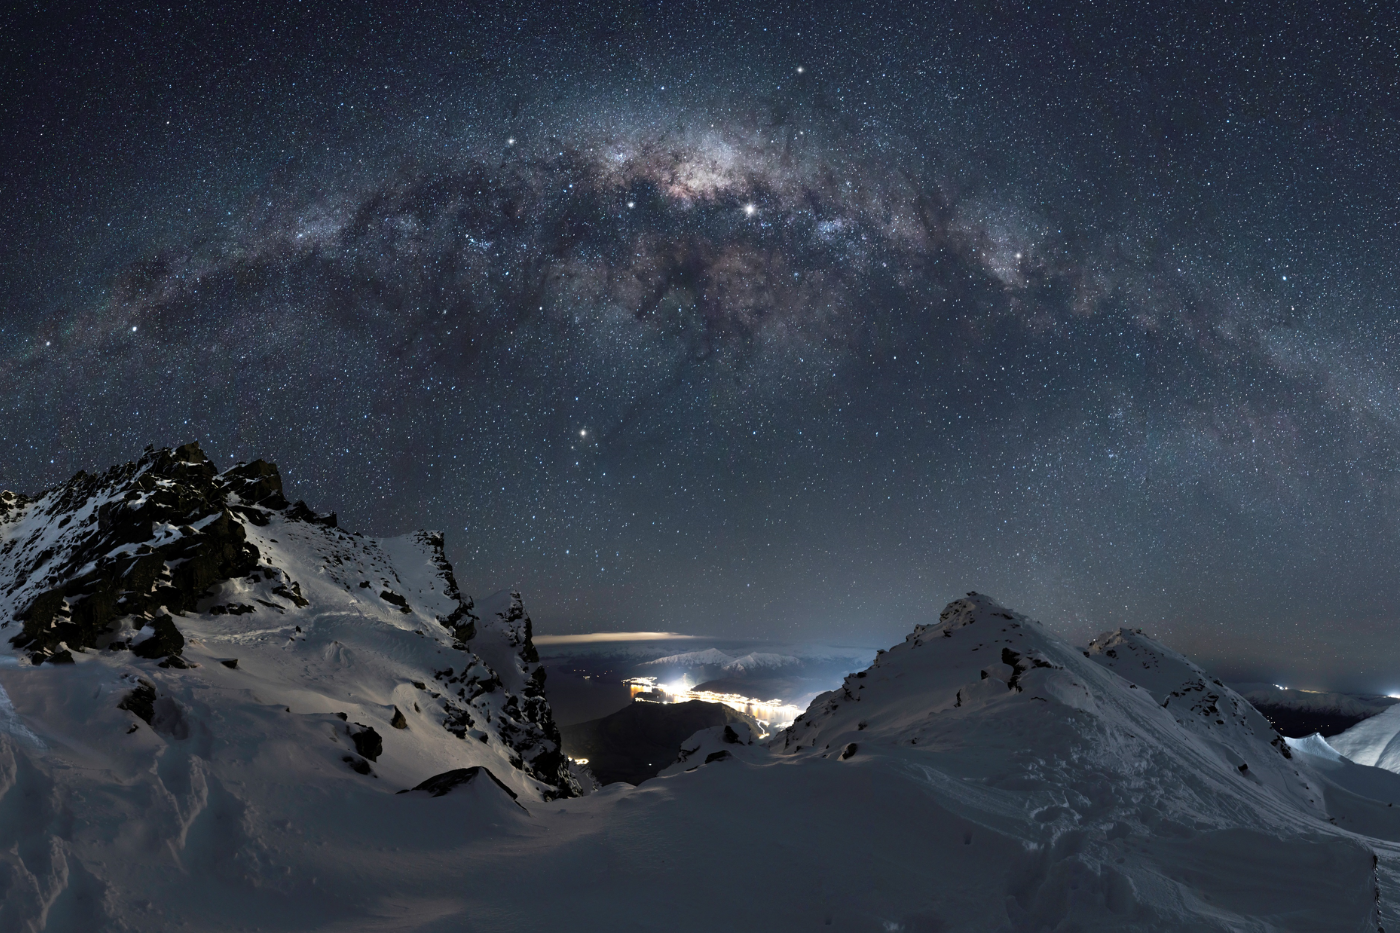 Astrophotography of the milky way above The Remarkables mountain range in Queenstown